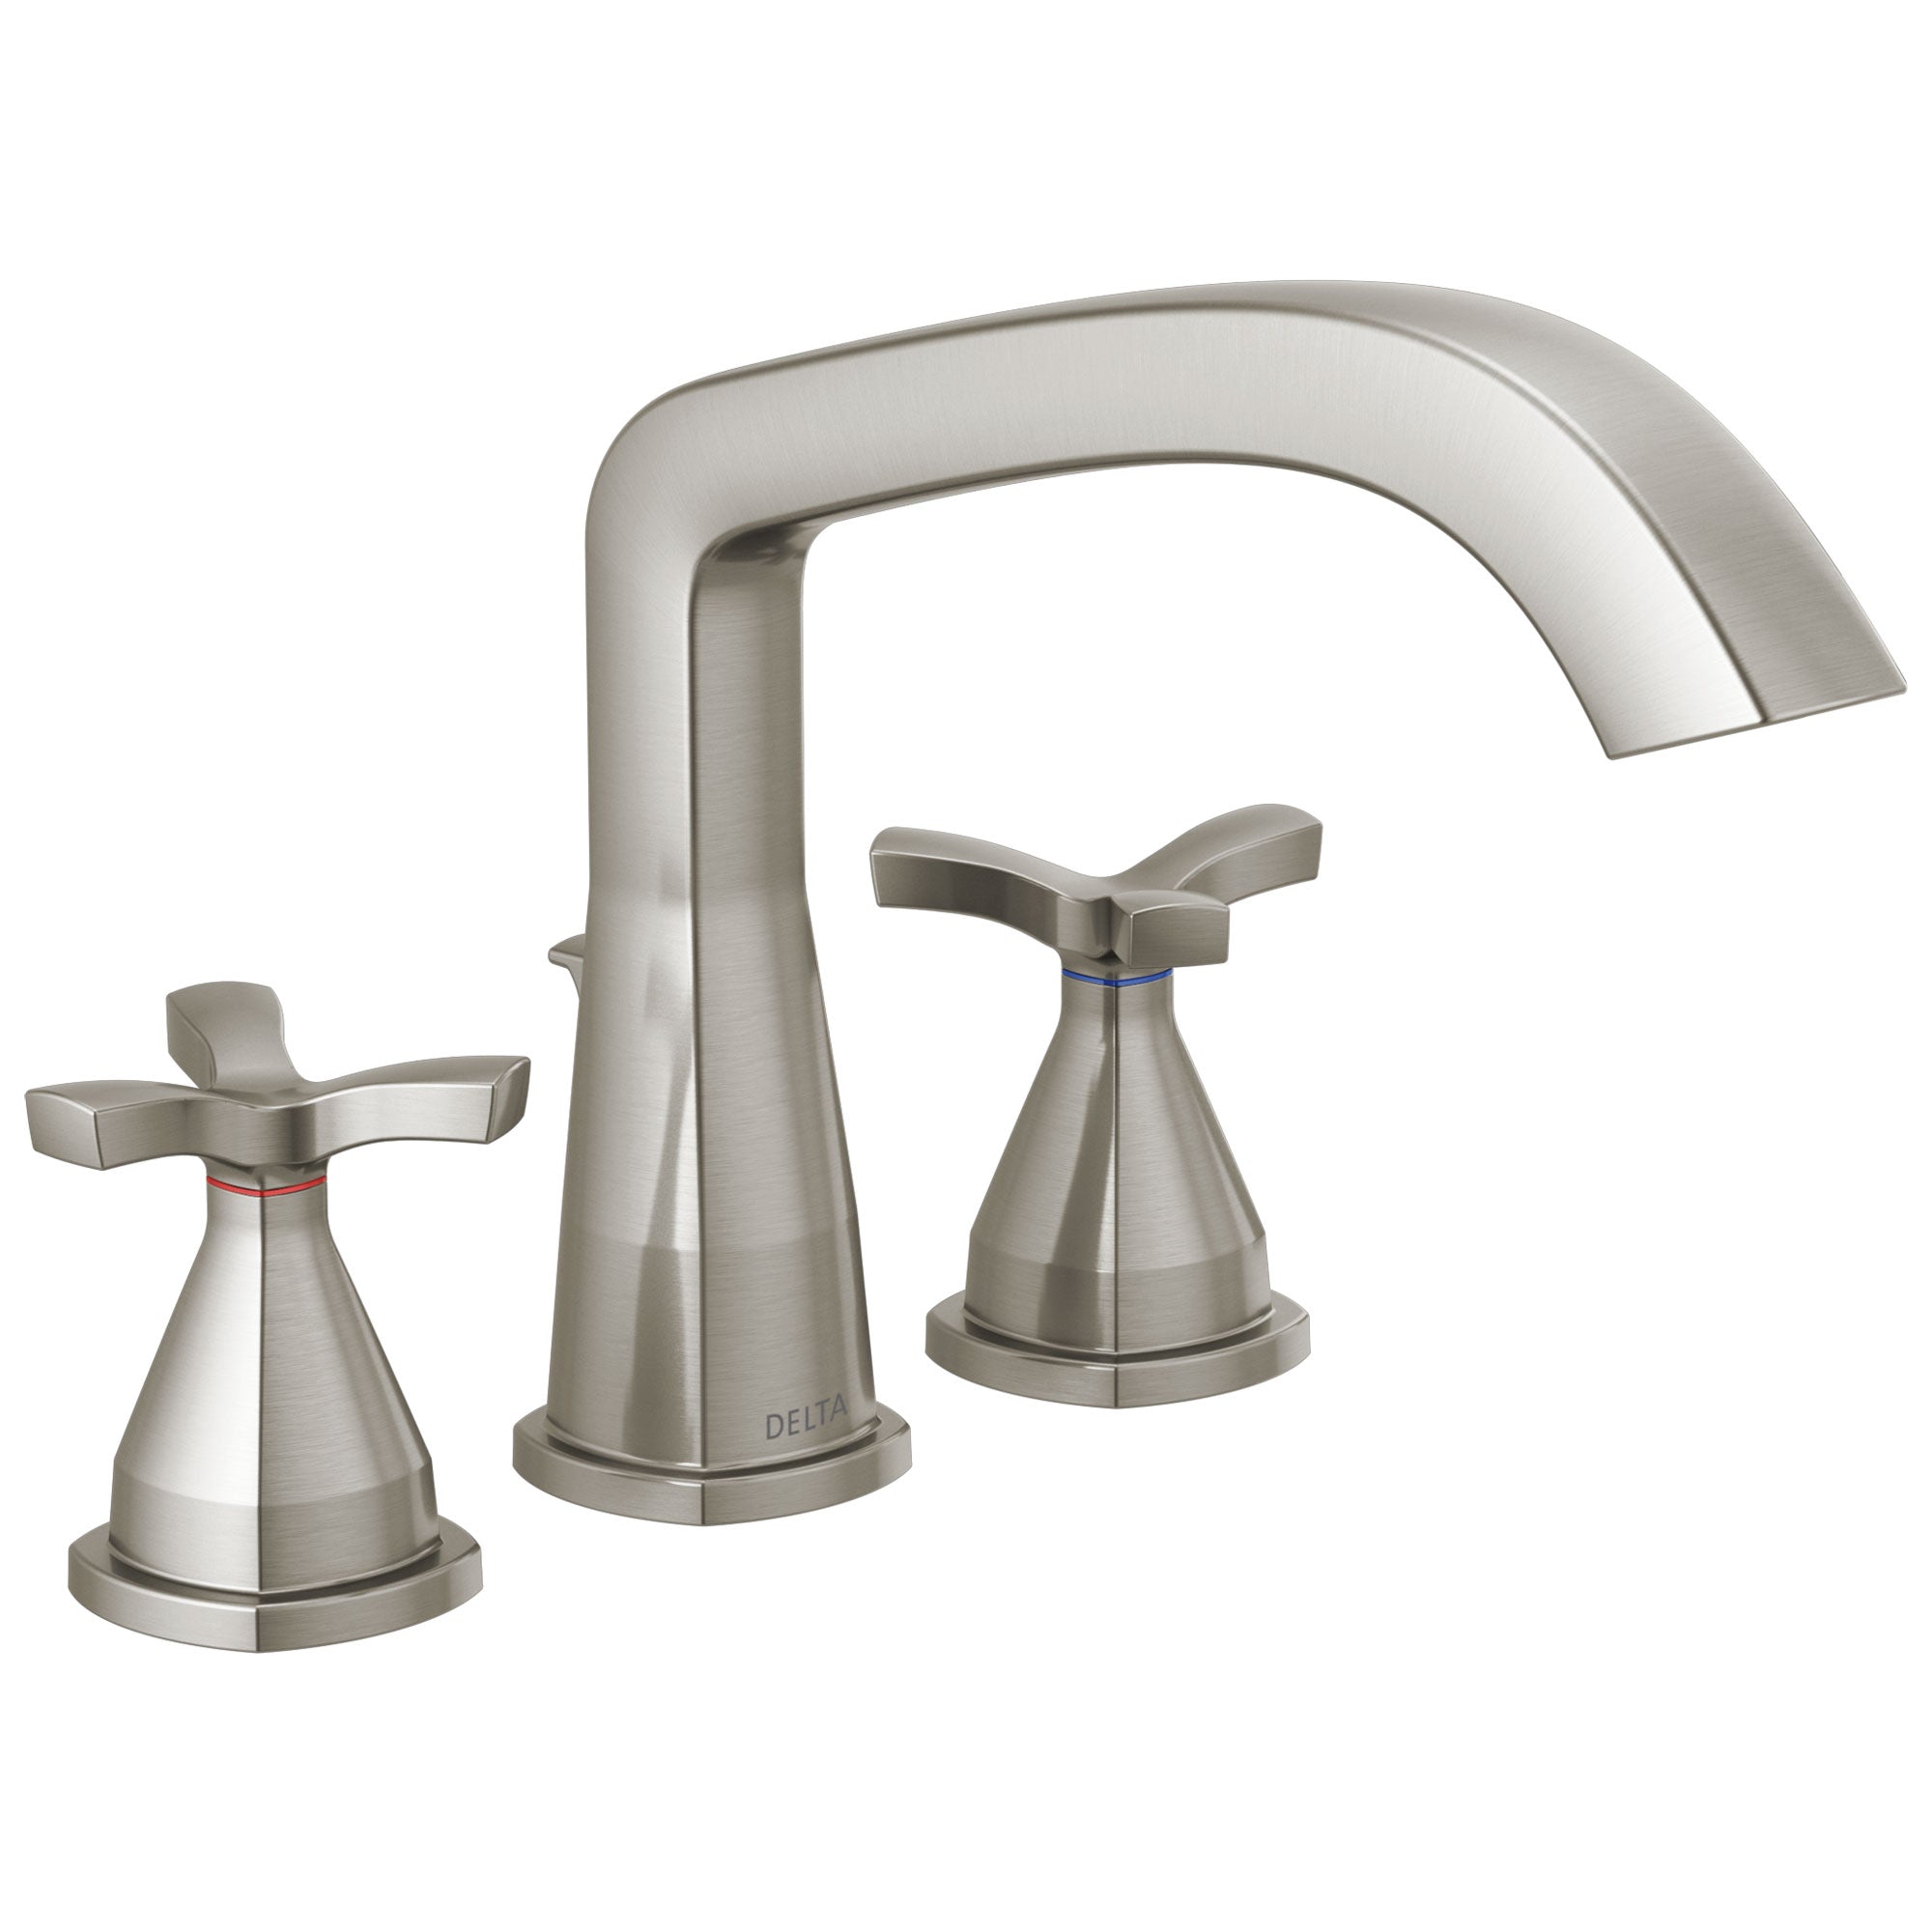 Delta Stryke Stainless Steel Finish Three Hole Cross Handle Roman Tub Filler Faucet Trim Kit (Requires Valve) DT27766SS